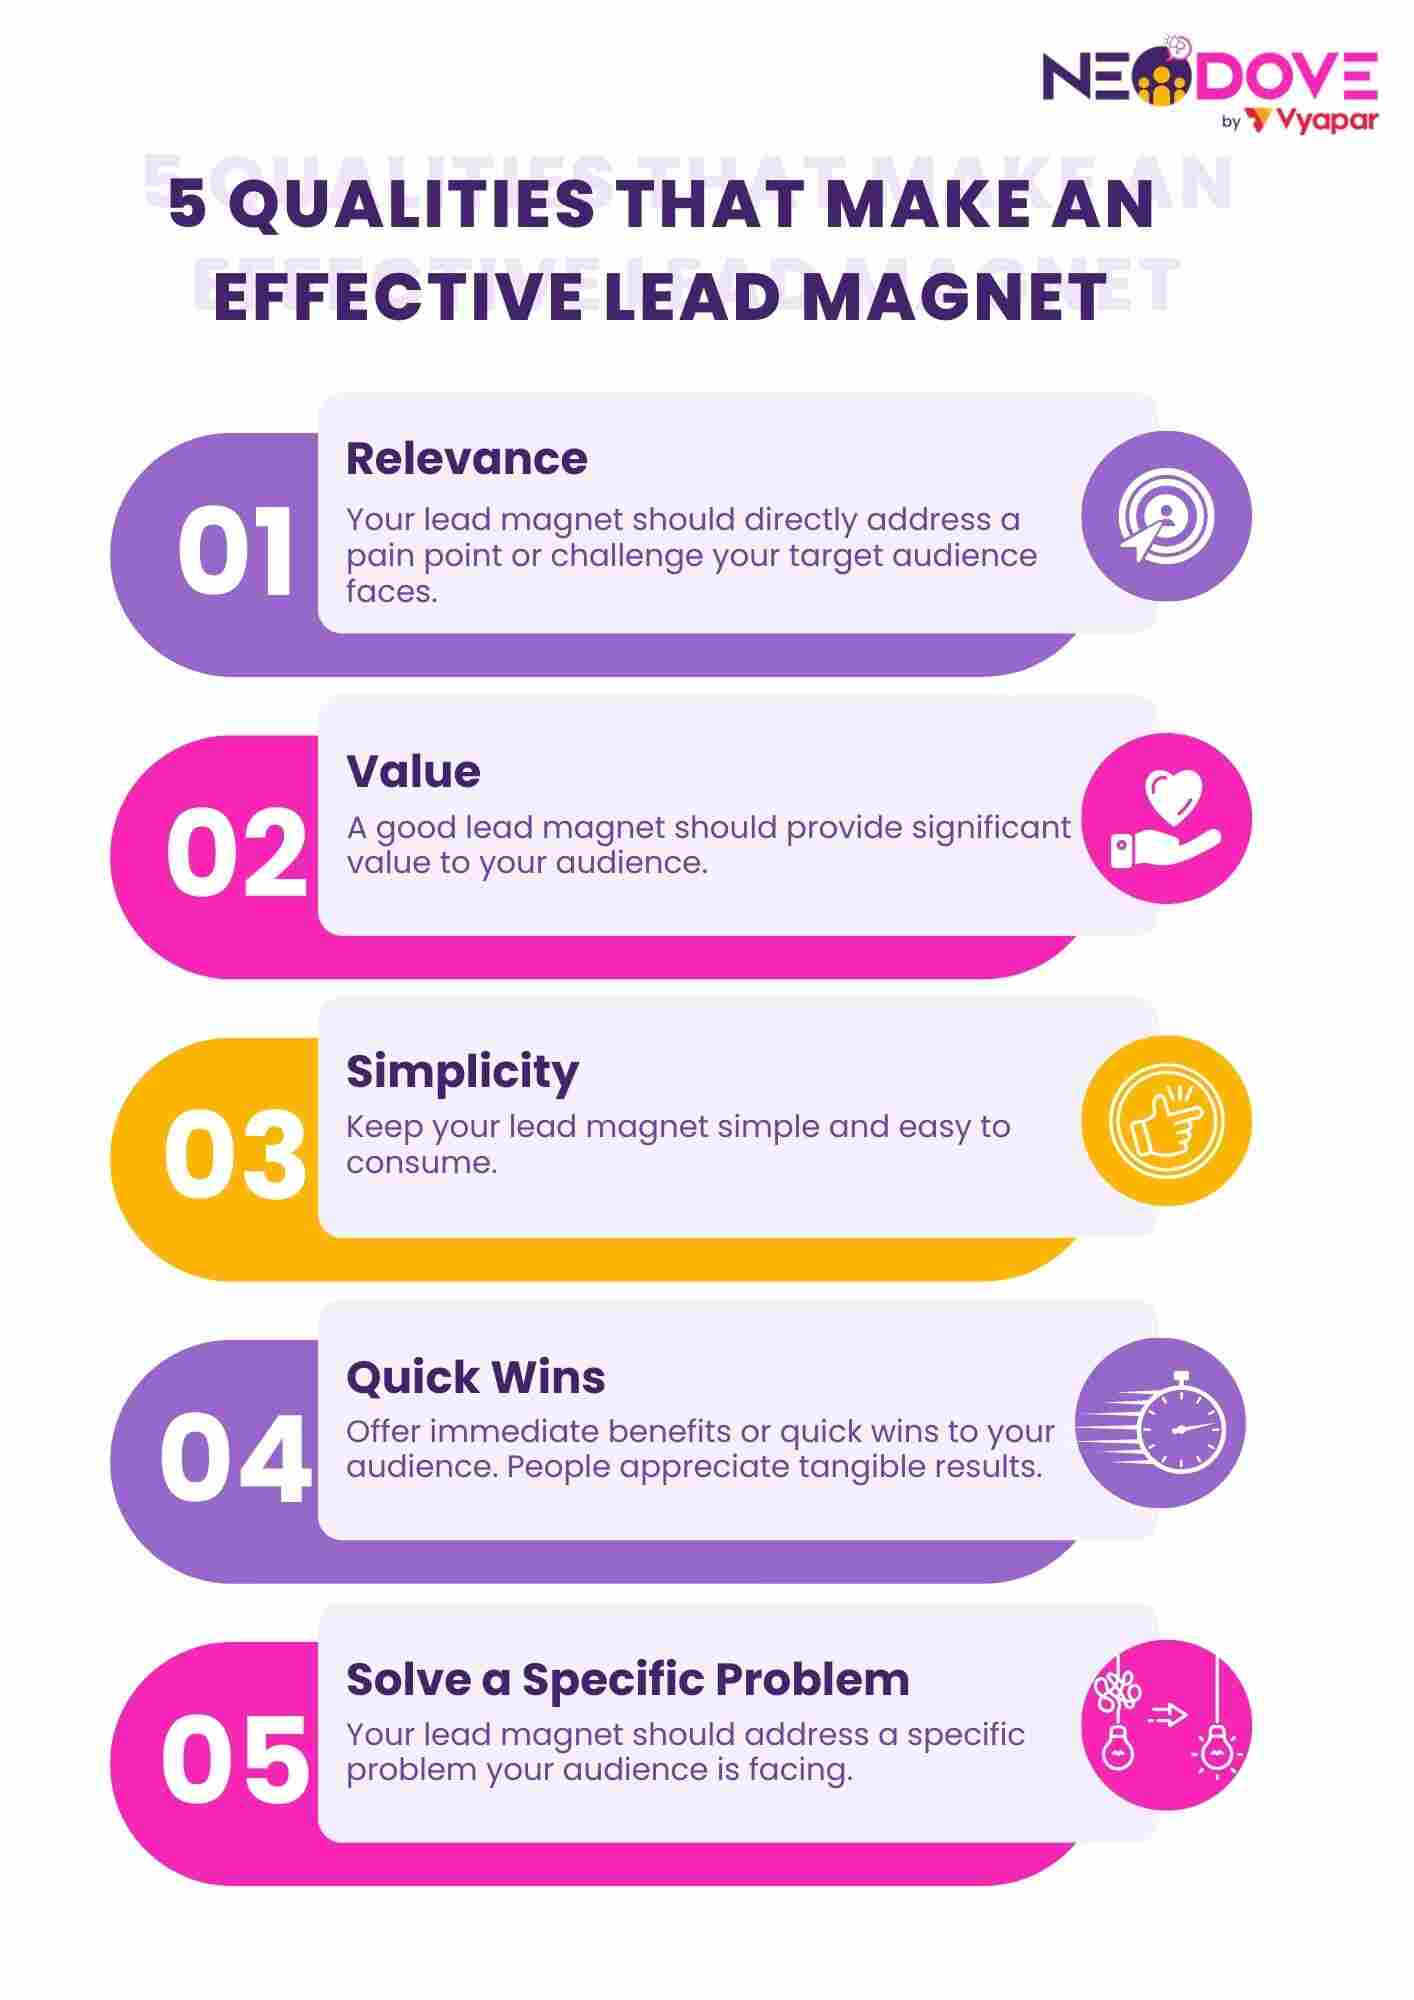 5 Qualities That Make An Effective Lead Magnet - Neodove